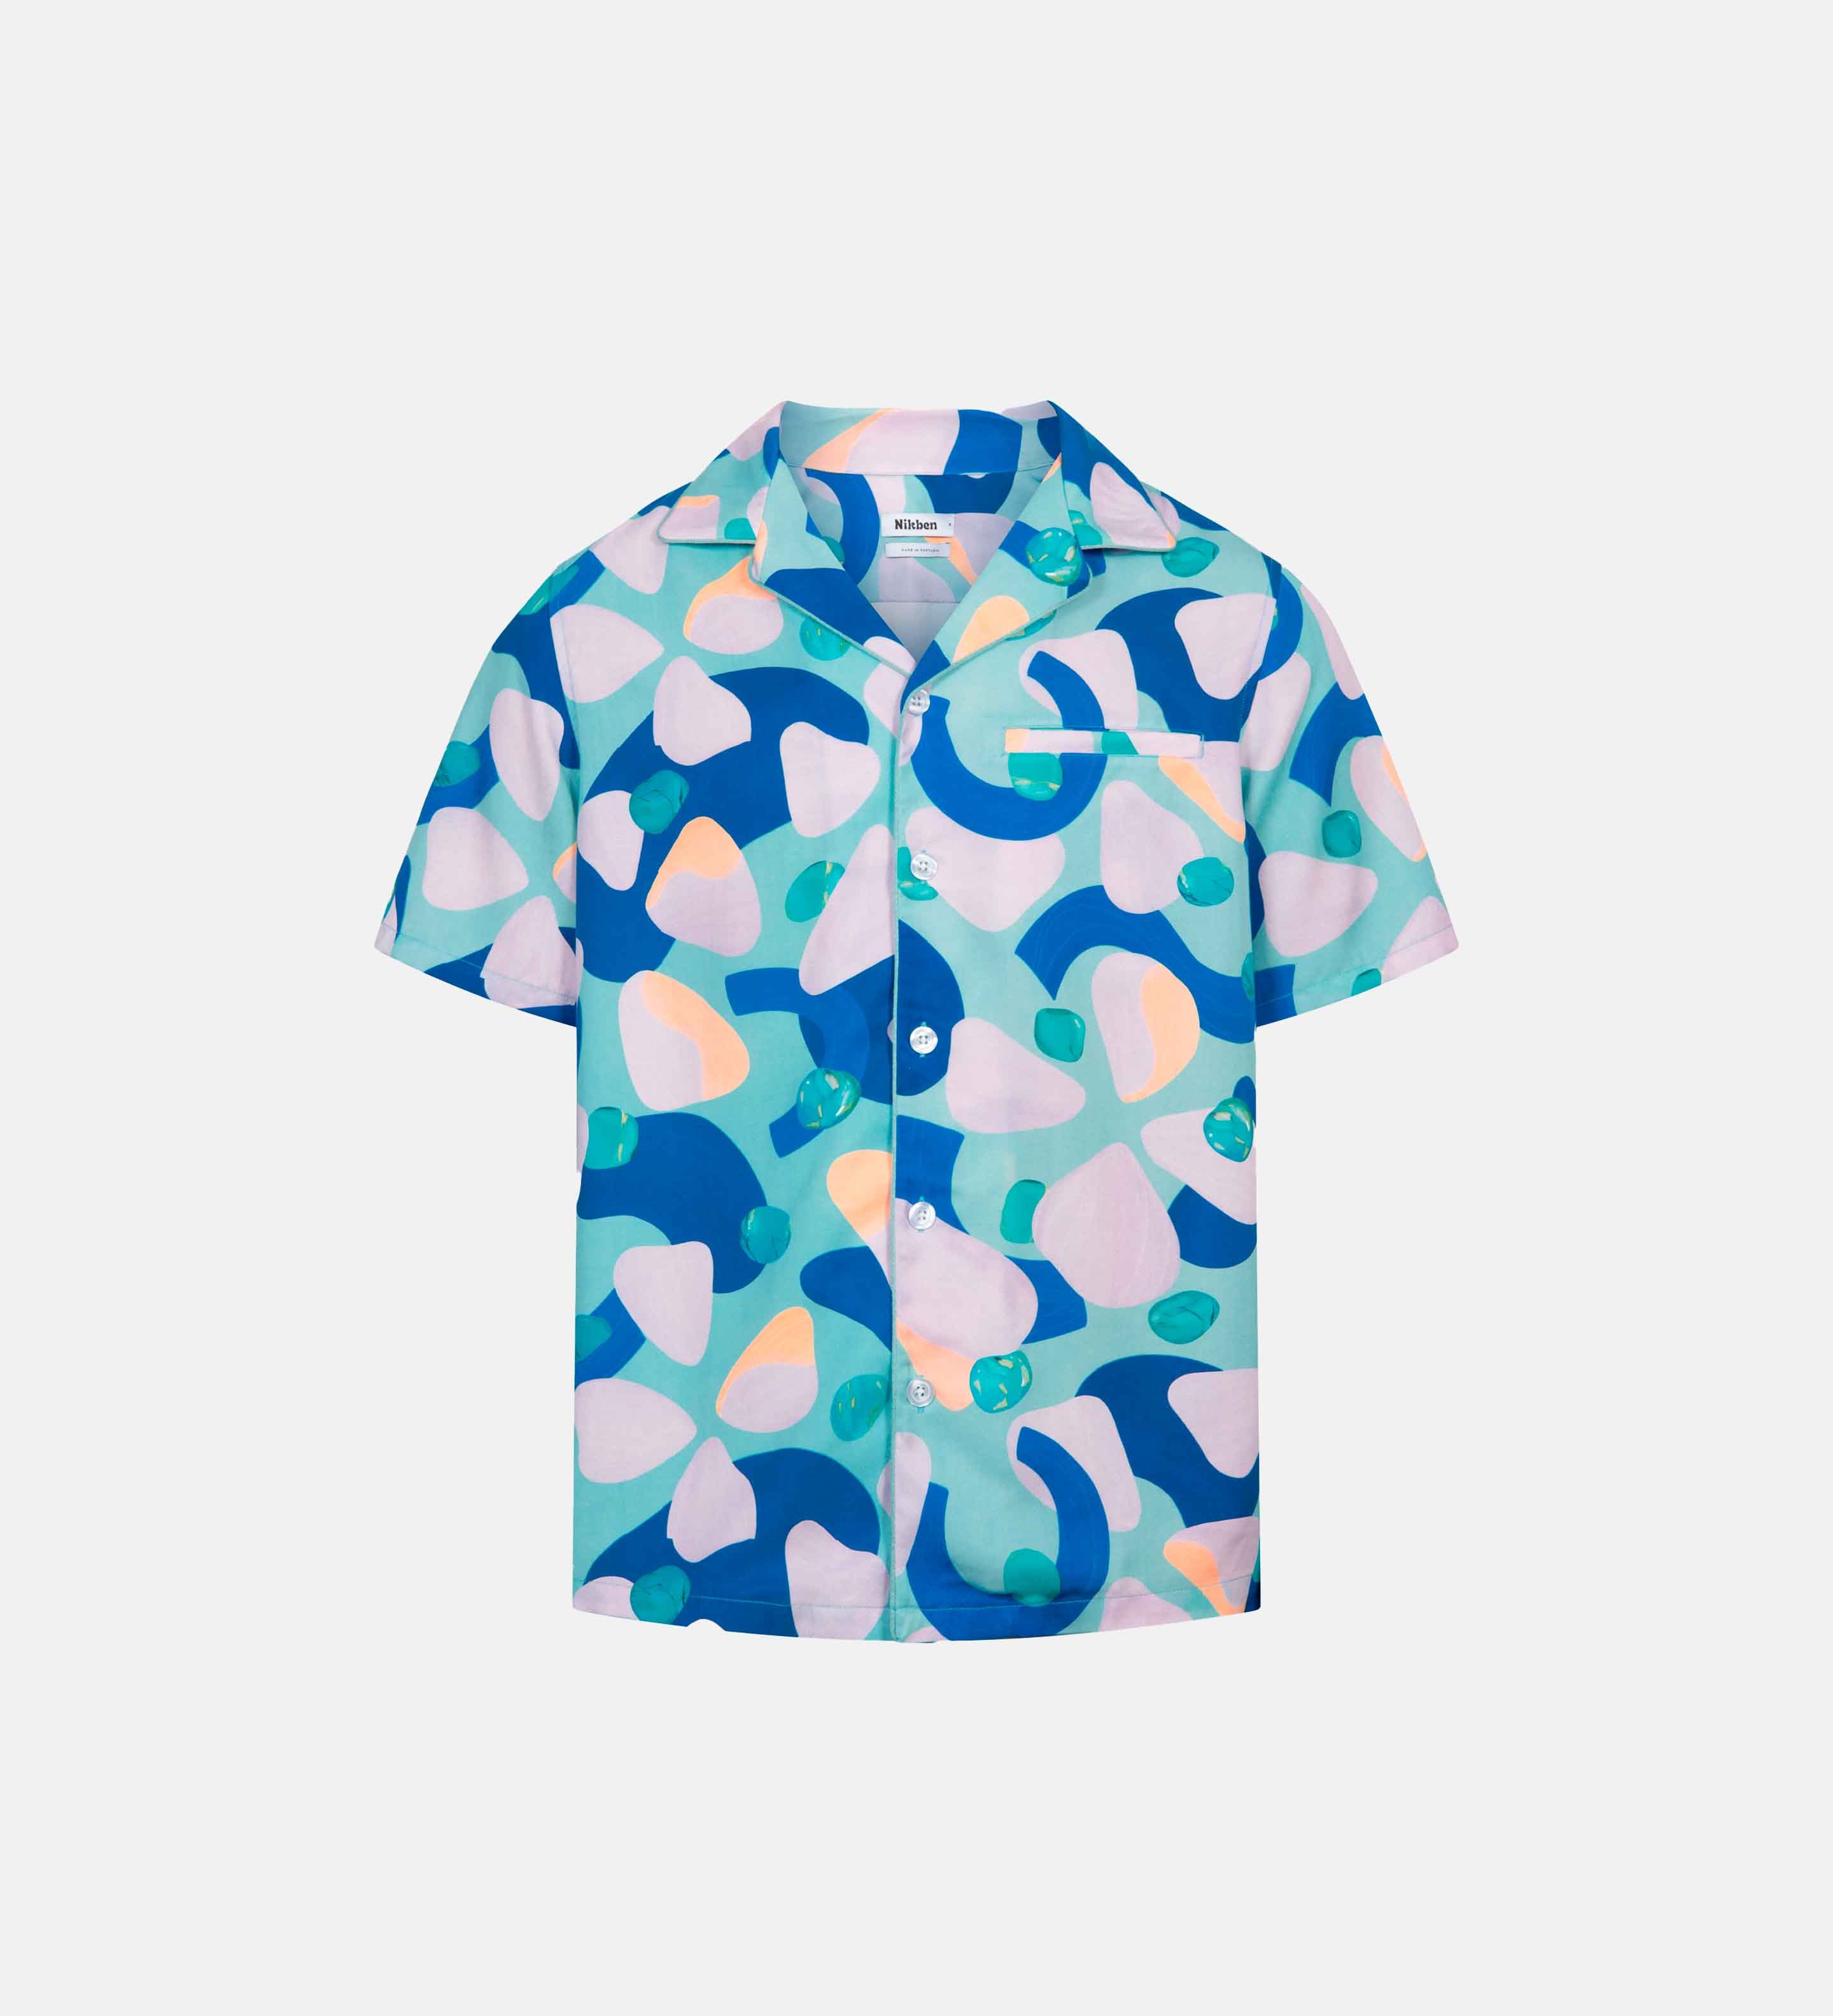 Short-sleeved vacation shirt with a multi-colored graphic patter, open collar, one breast pocket, and button closure.